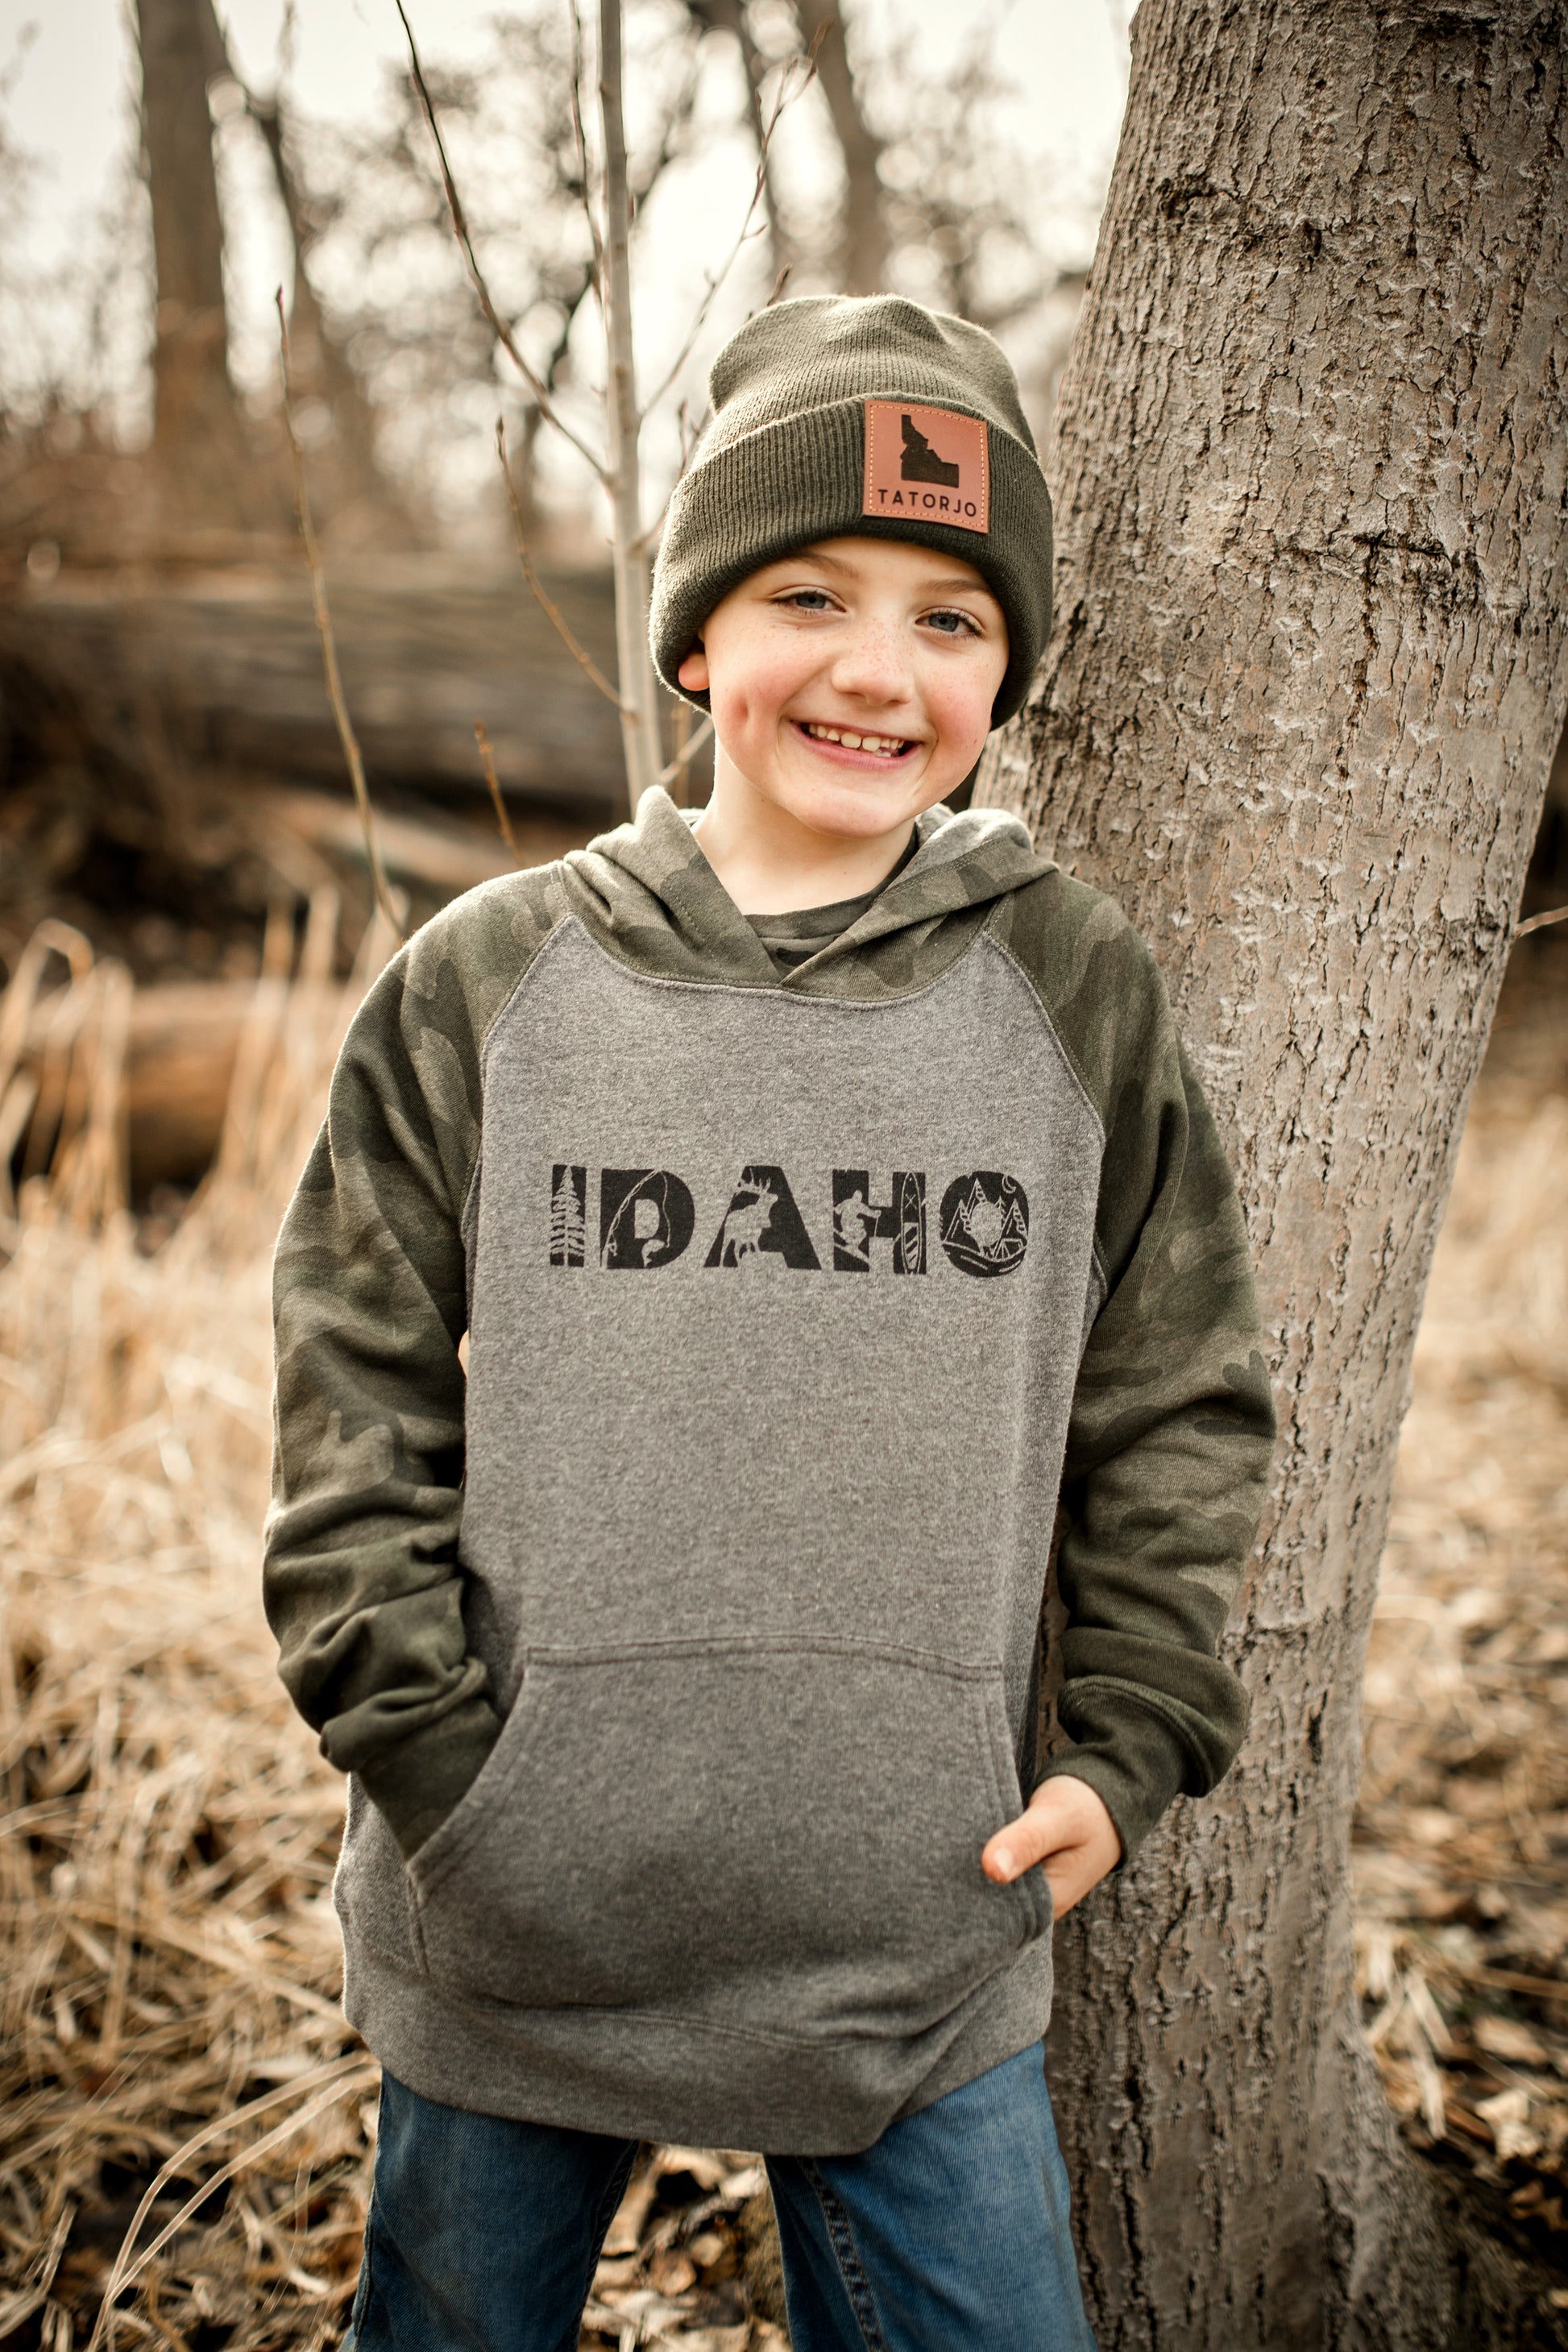 Get ready to embrace Idaho's outdoor vibes with our Adventure Camo Hoodie! This stylish camo design pays homage to the Gem State's rugged beauty and spirit. Perfect for exploring wildlife, camping, and paddle boarding in the mountains. Lightweight and ideal for spring and summer nights. An essential for every adventure-loving Idahoan. Idaho Apparel. Made in Idaho. TatorJo Apparel. Made in Idaho. Idaho sweaters. Idaho hoodies. Idaho gifts. Idaho moving to Idaho.